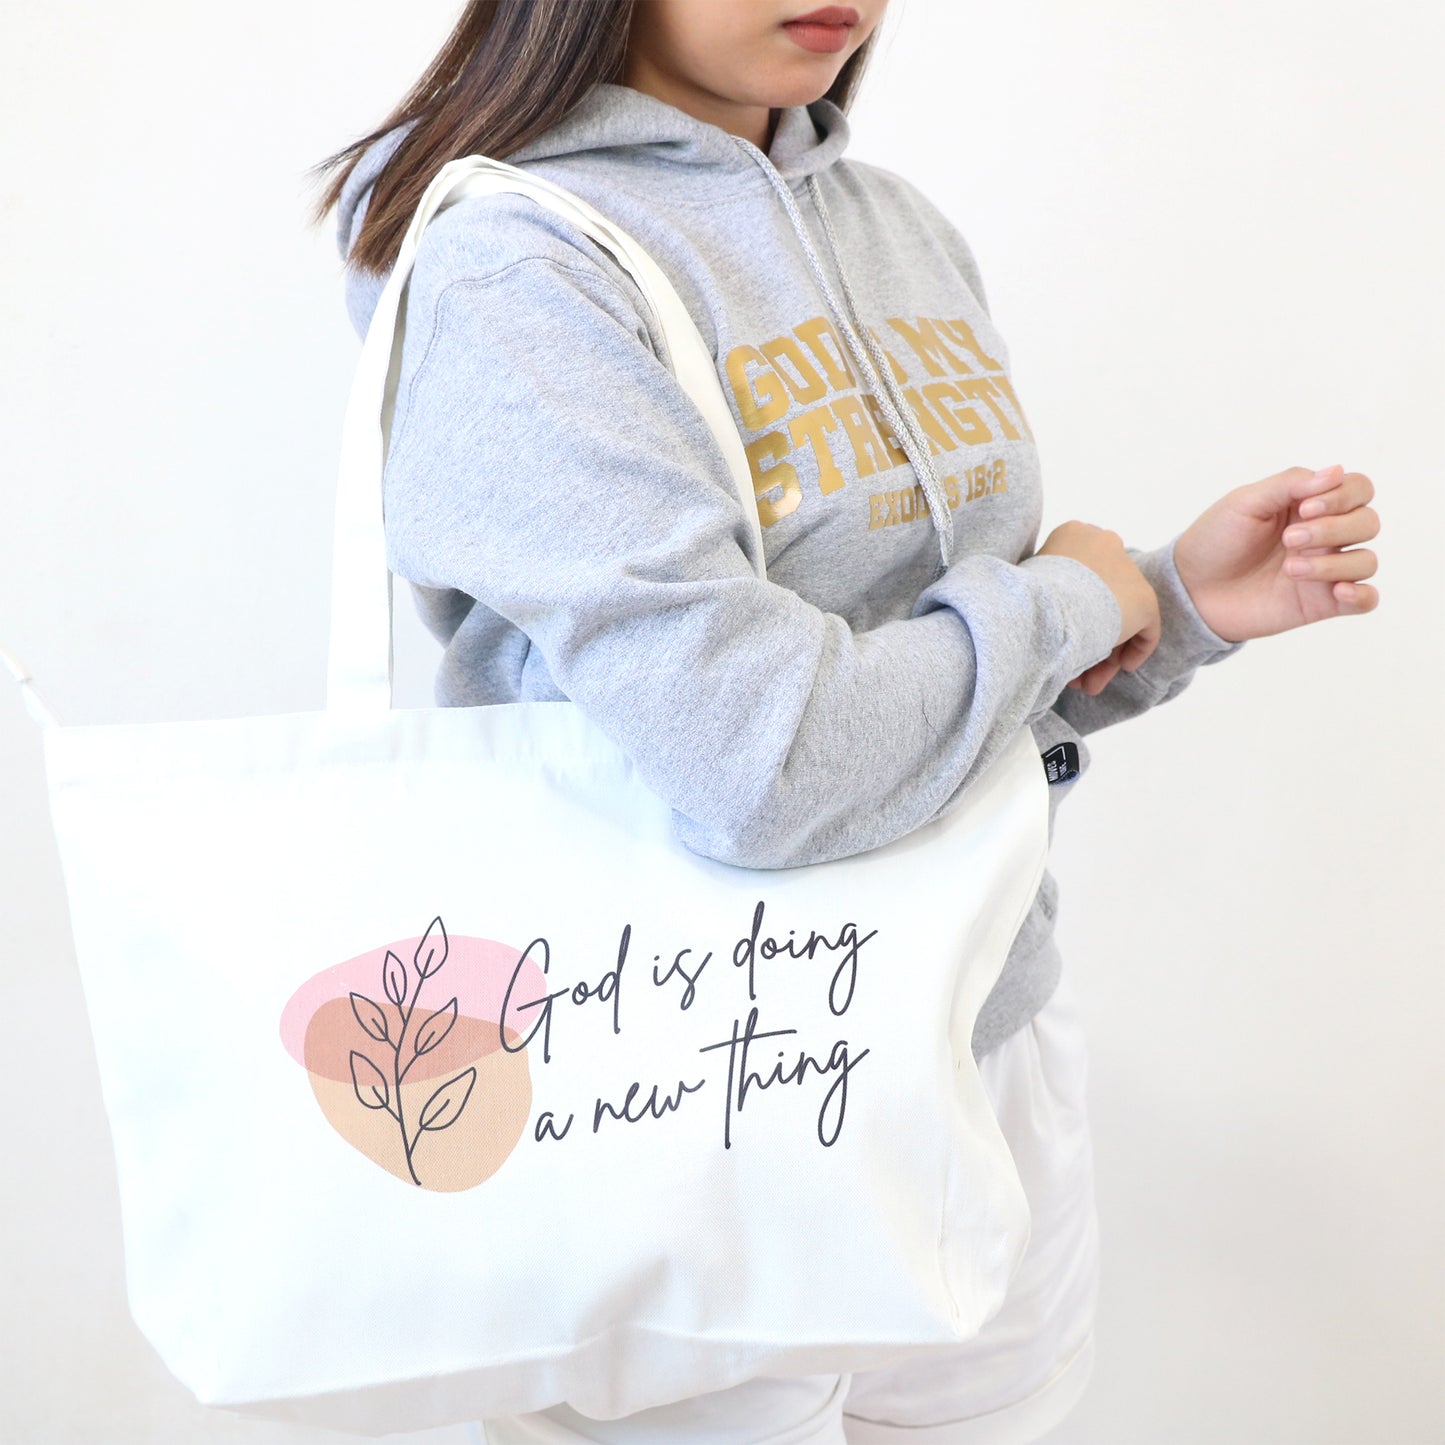 Tote Bag Expandable-God is doing a new thing